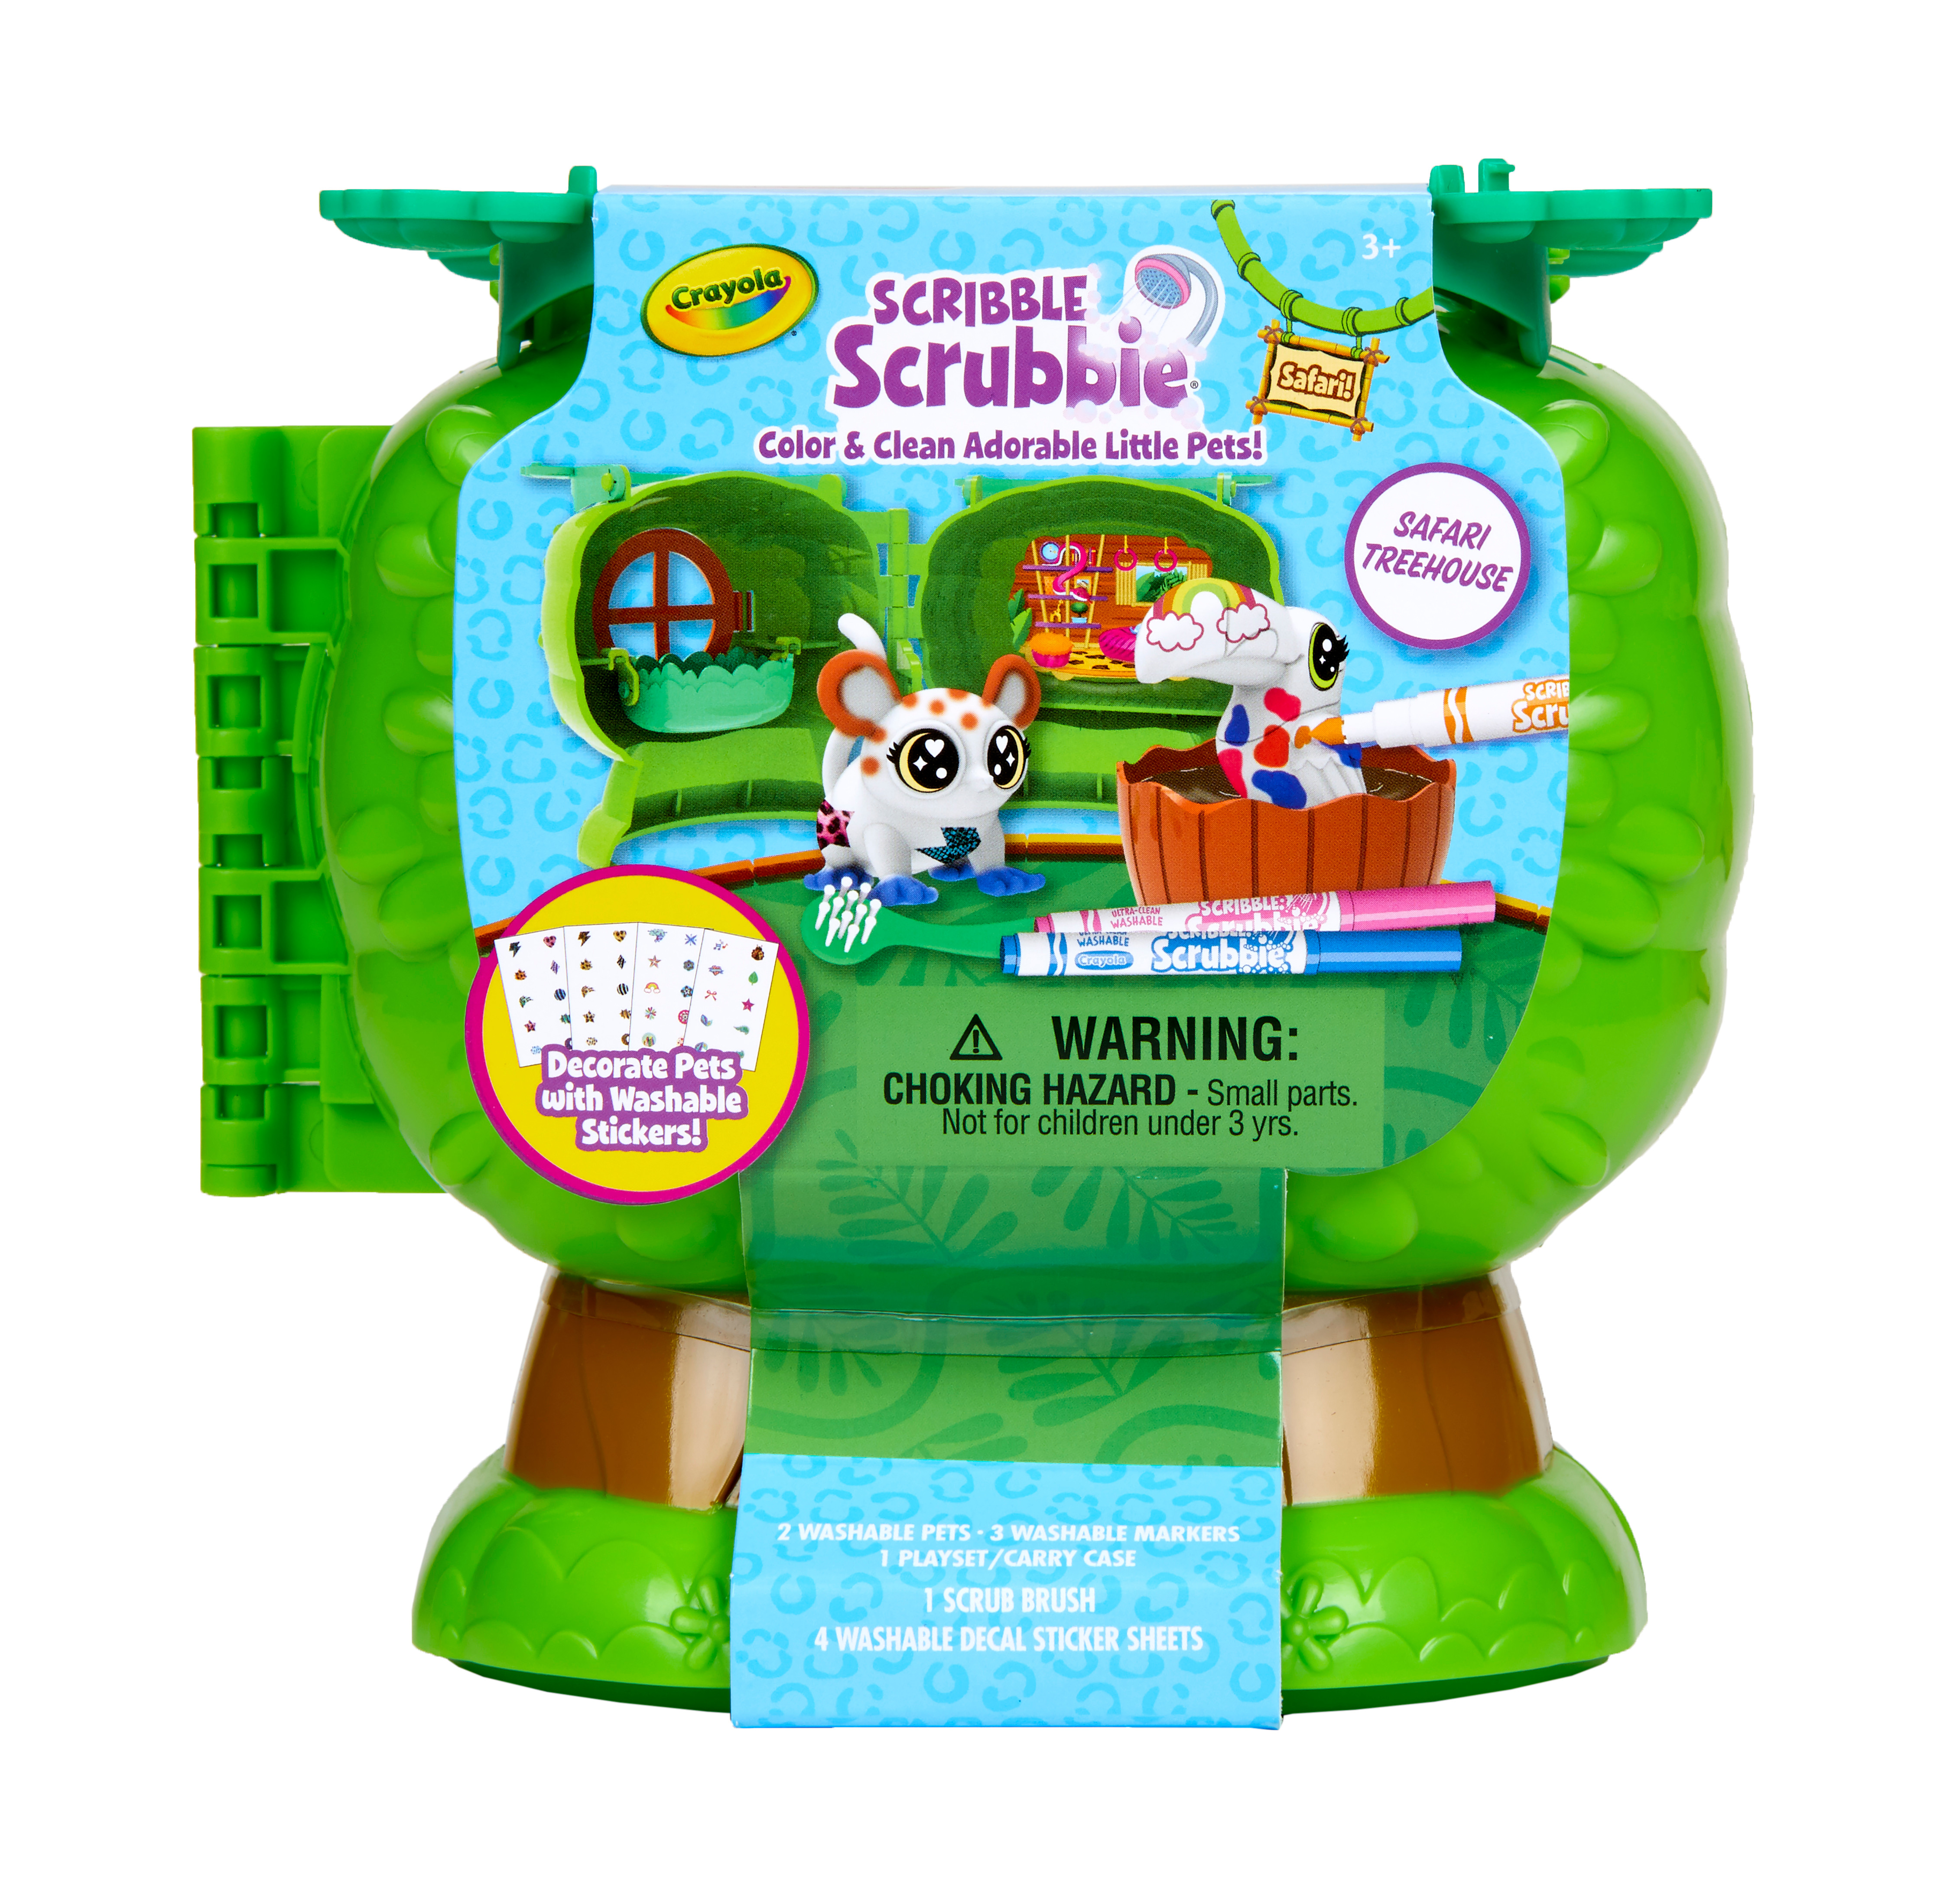 Crayola Scribble Scrubbie Pets Safari Treehouse Toy Set, Coloring Toys & Gifts, Beginner Unisex Child - image 5 of 9